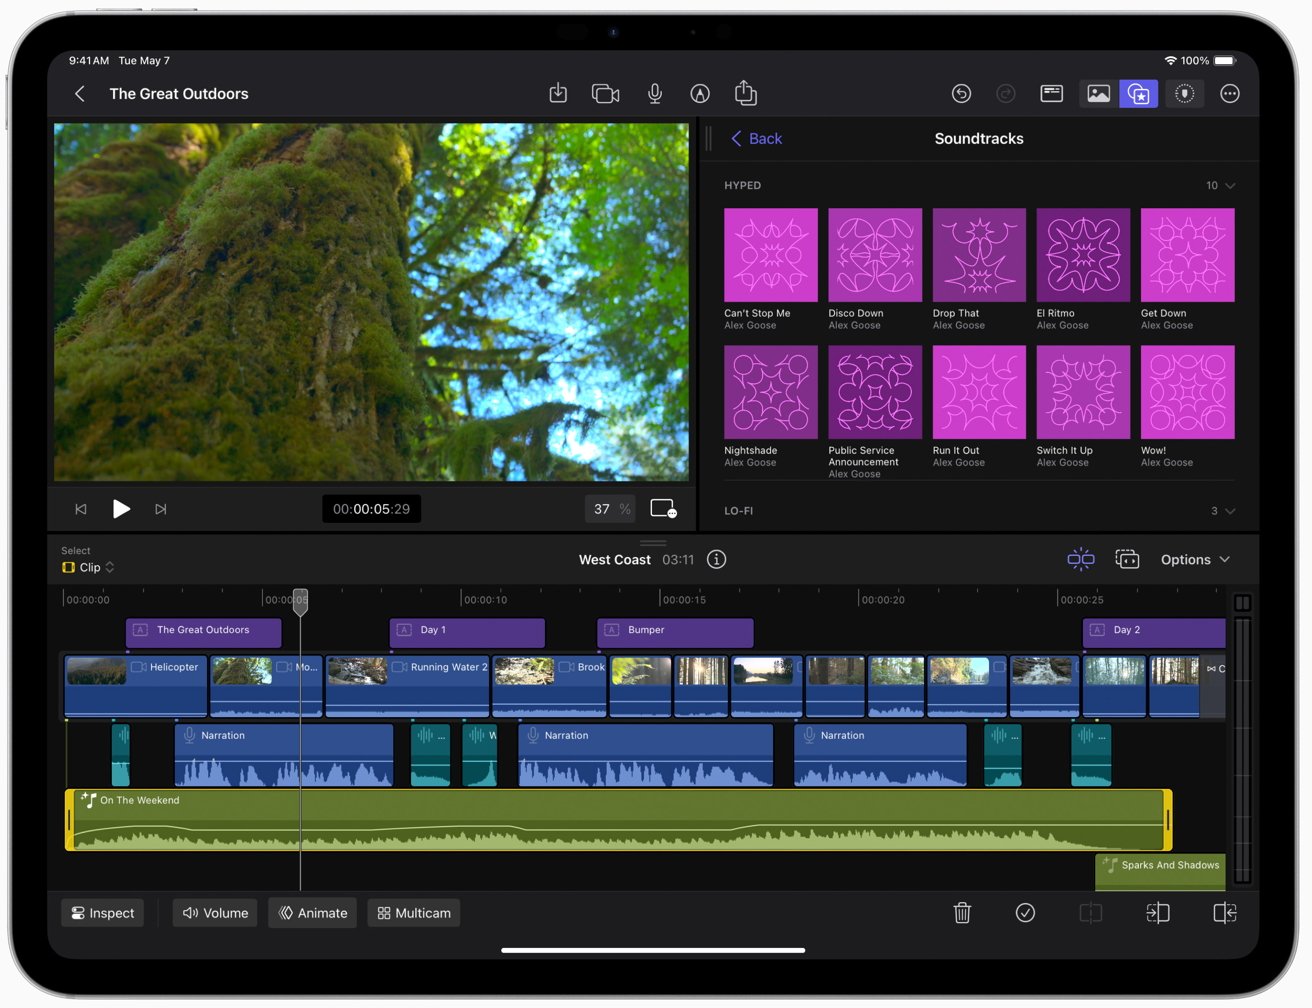 Screen of a iPad showing Final Cut Pro video editing app interface with a timeline, clips, soundtracks, and playback controls.